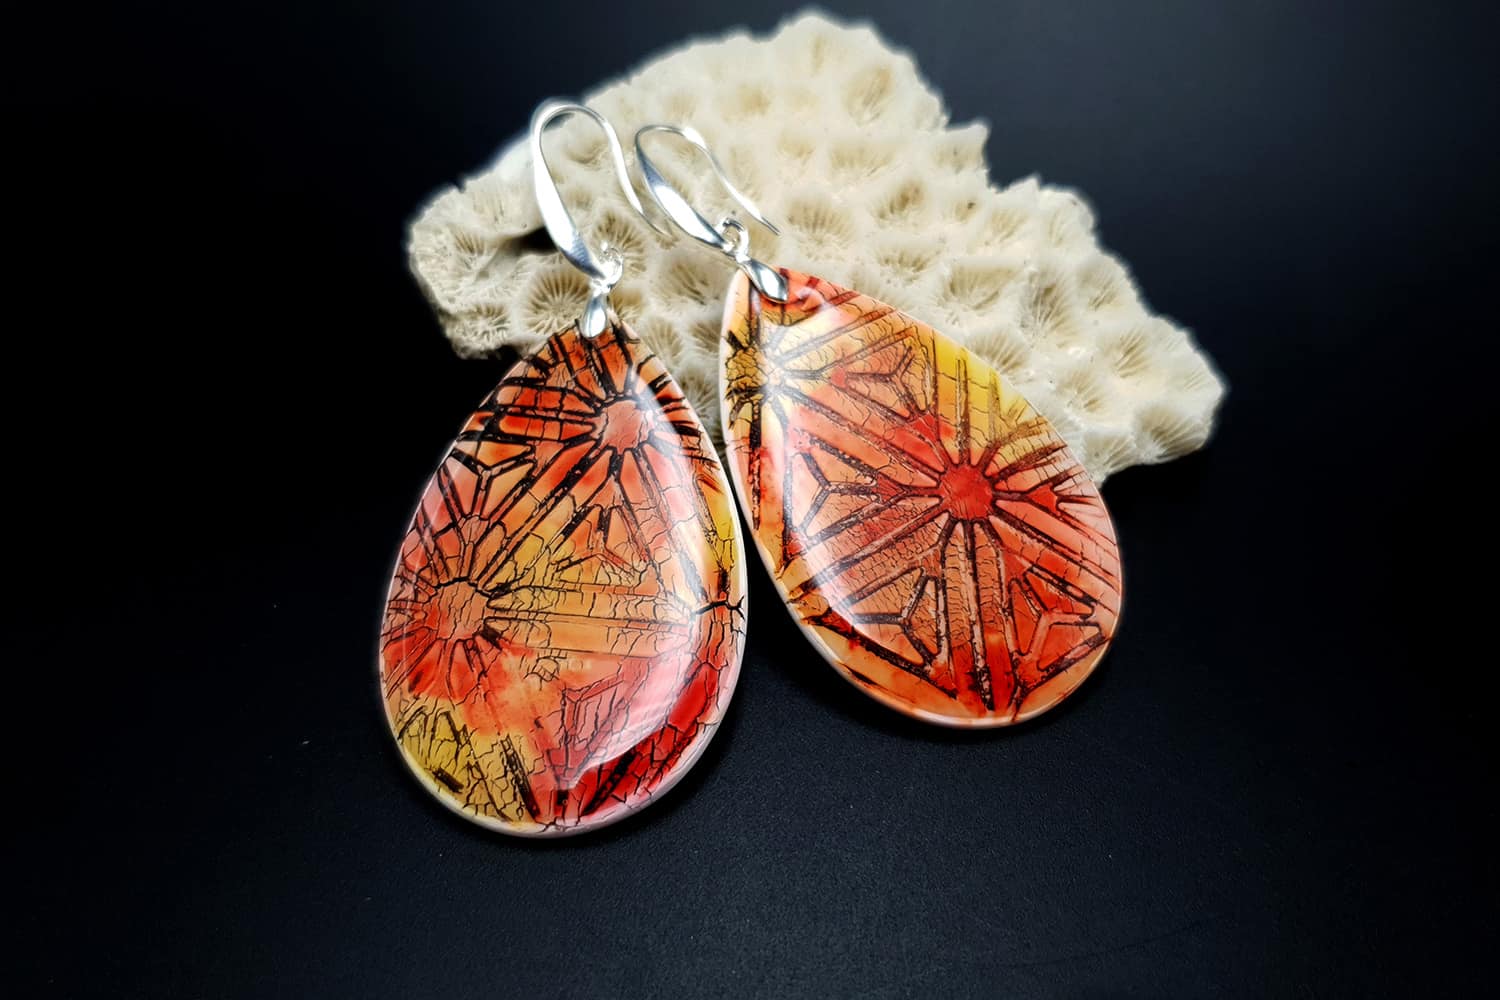 Jewelry from "Faux Glazed Cracked Ceramic" course for your inspiration #4